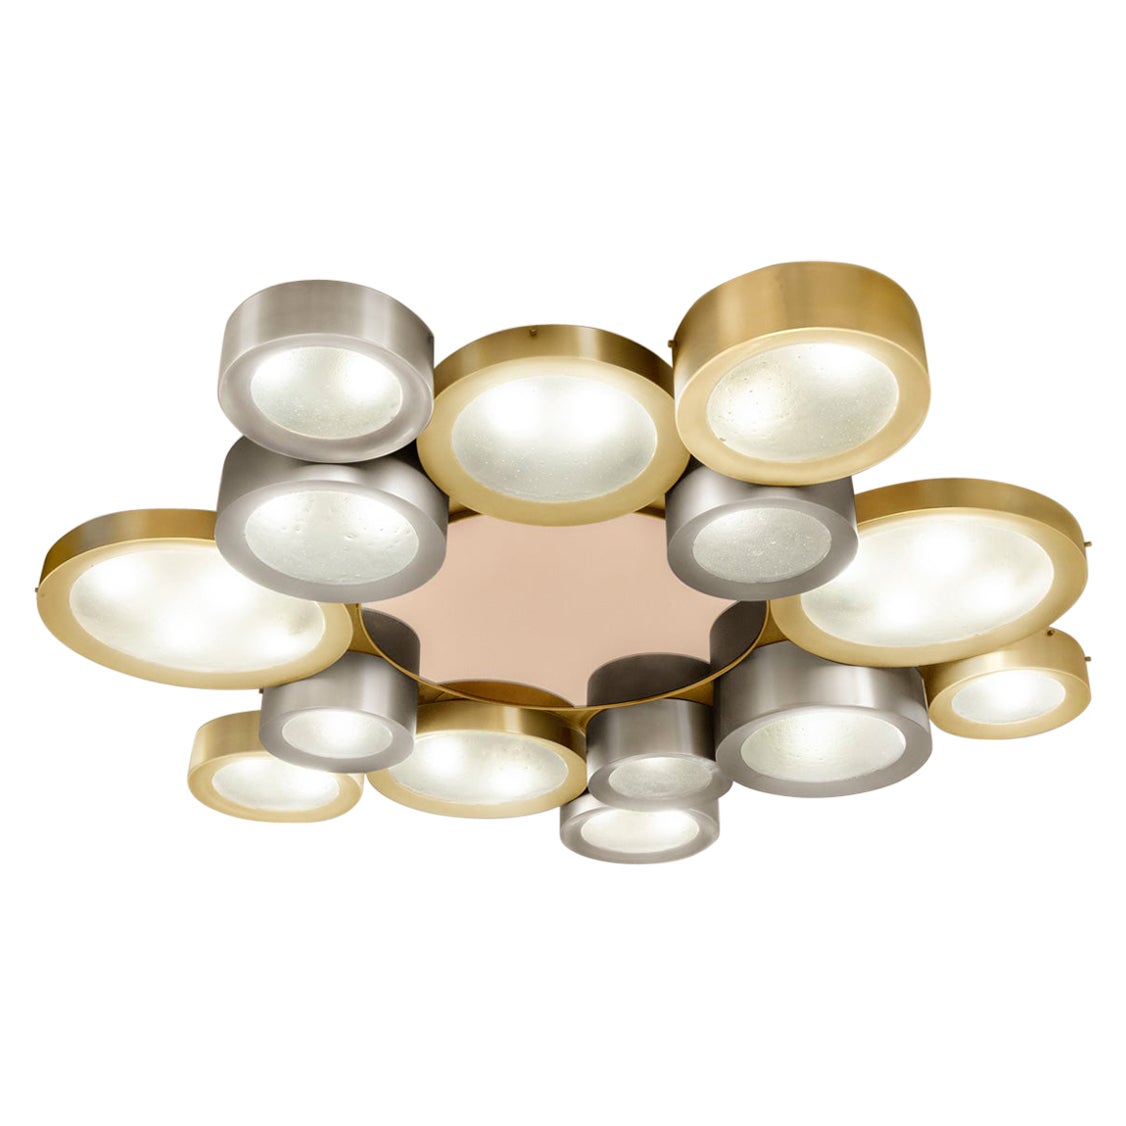 Helios 66 Ceiling Light by Gaspare Asaro-Satin Brass and Satin Nickel Finish